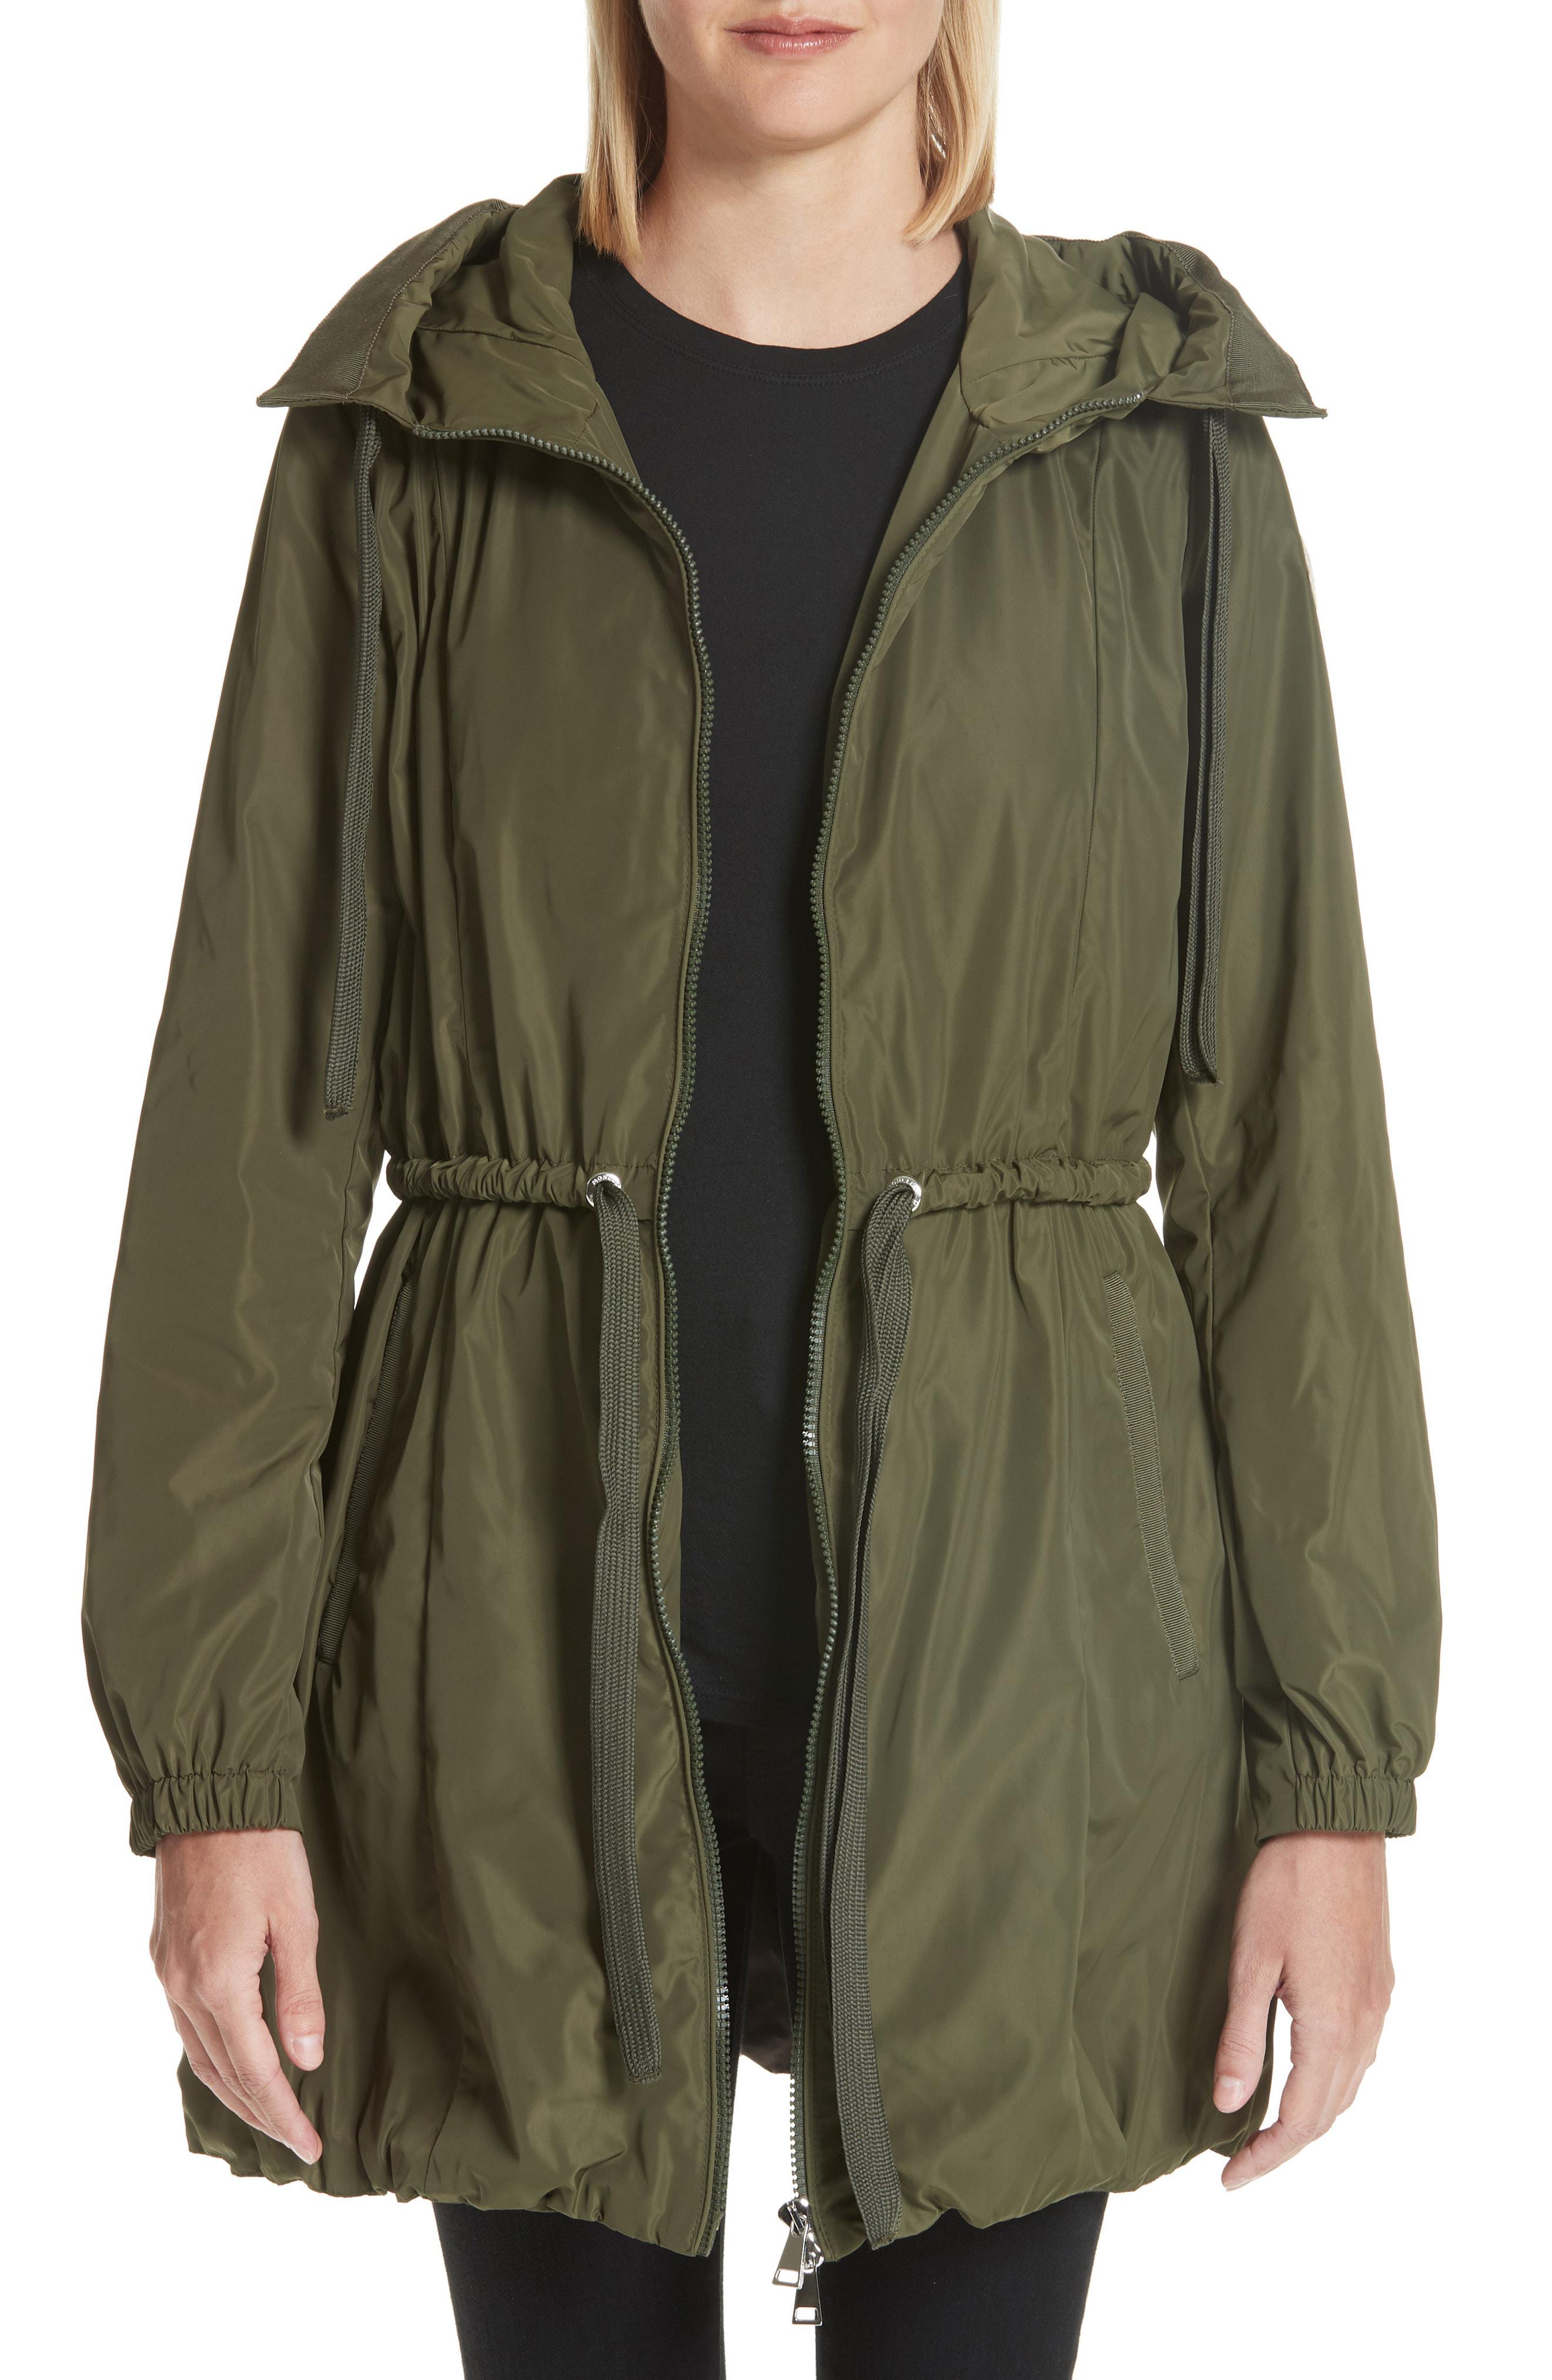 Moncler Topaze Water Resistant Hooded Jacket in Olive (Green) - Lyst